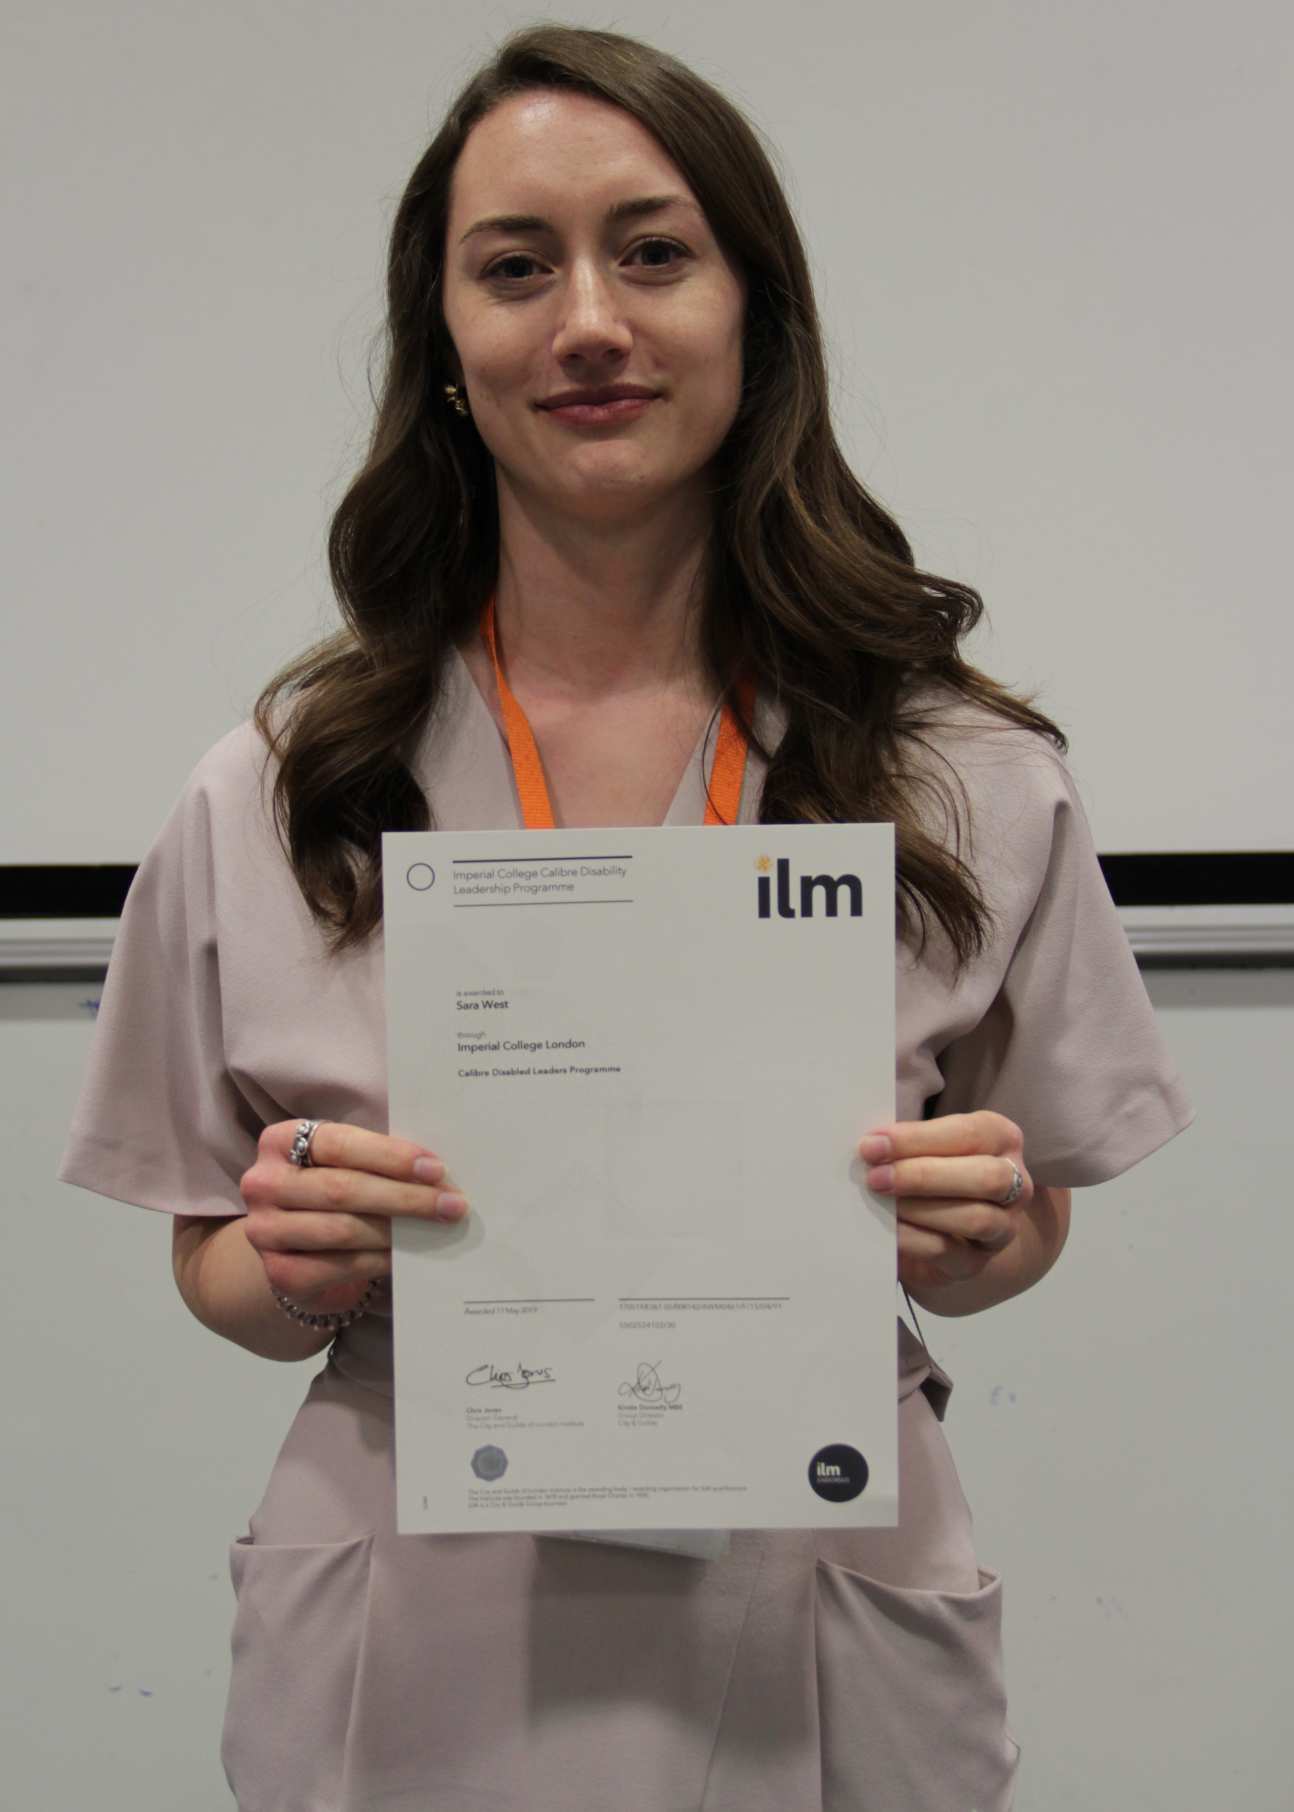 Woman smiles at camera holding certificate